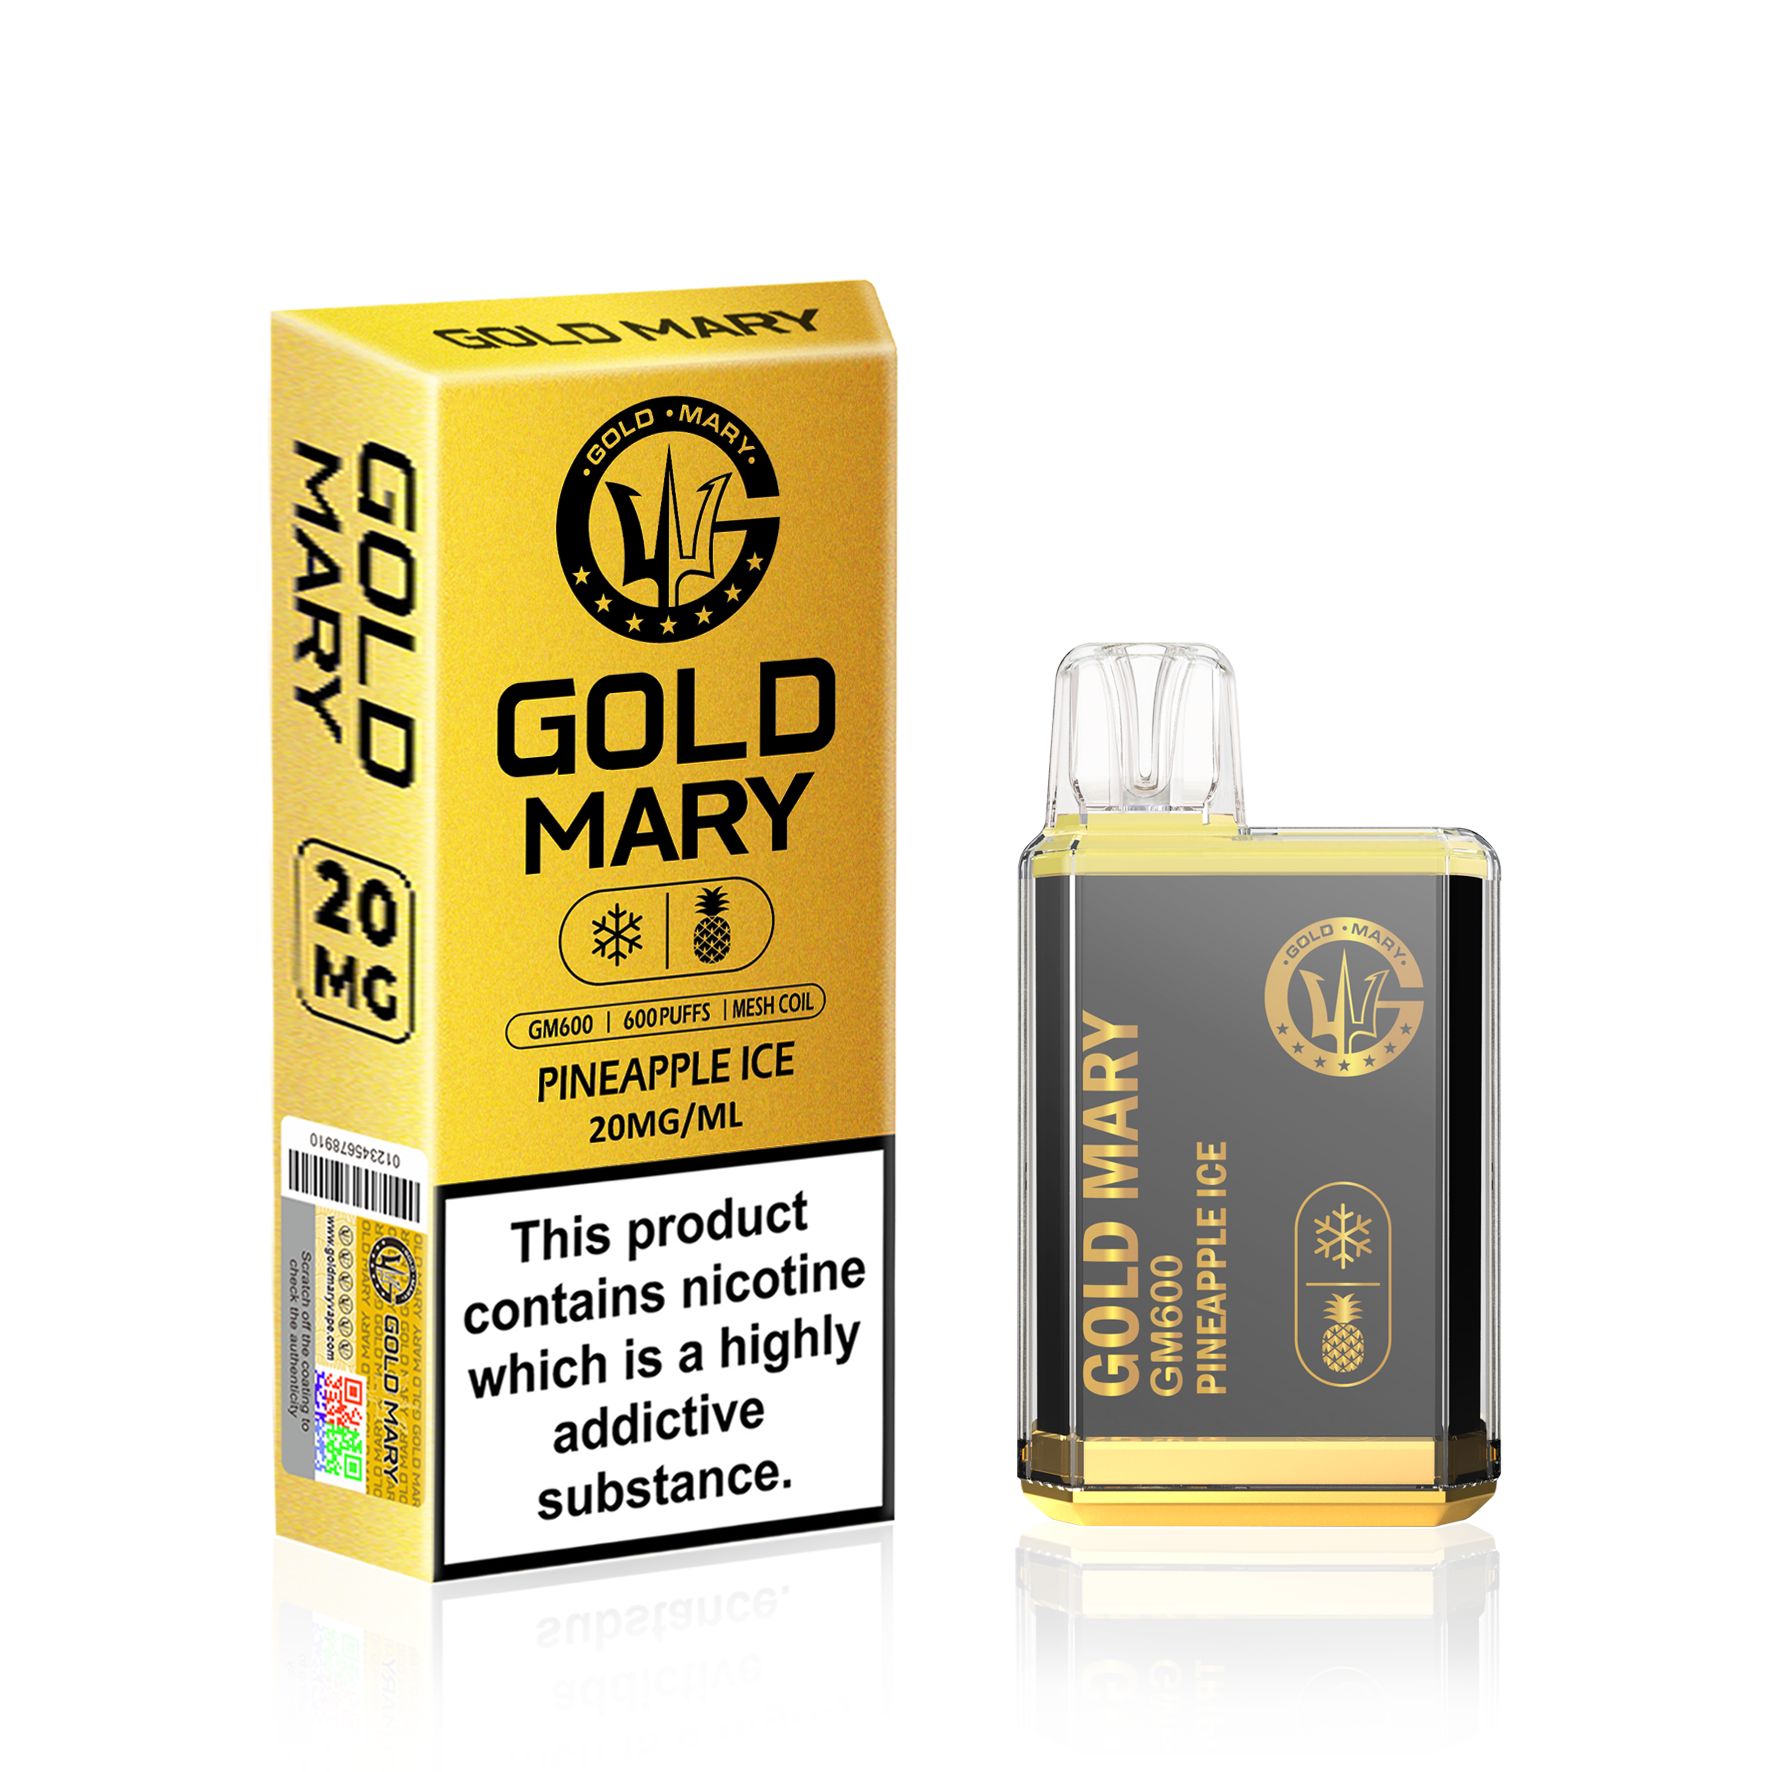 Gold Mary GM600 Disposable Vape Puff Bar Pod Device - Wolfvapes.co.uk-Pineapple Ice